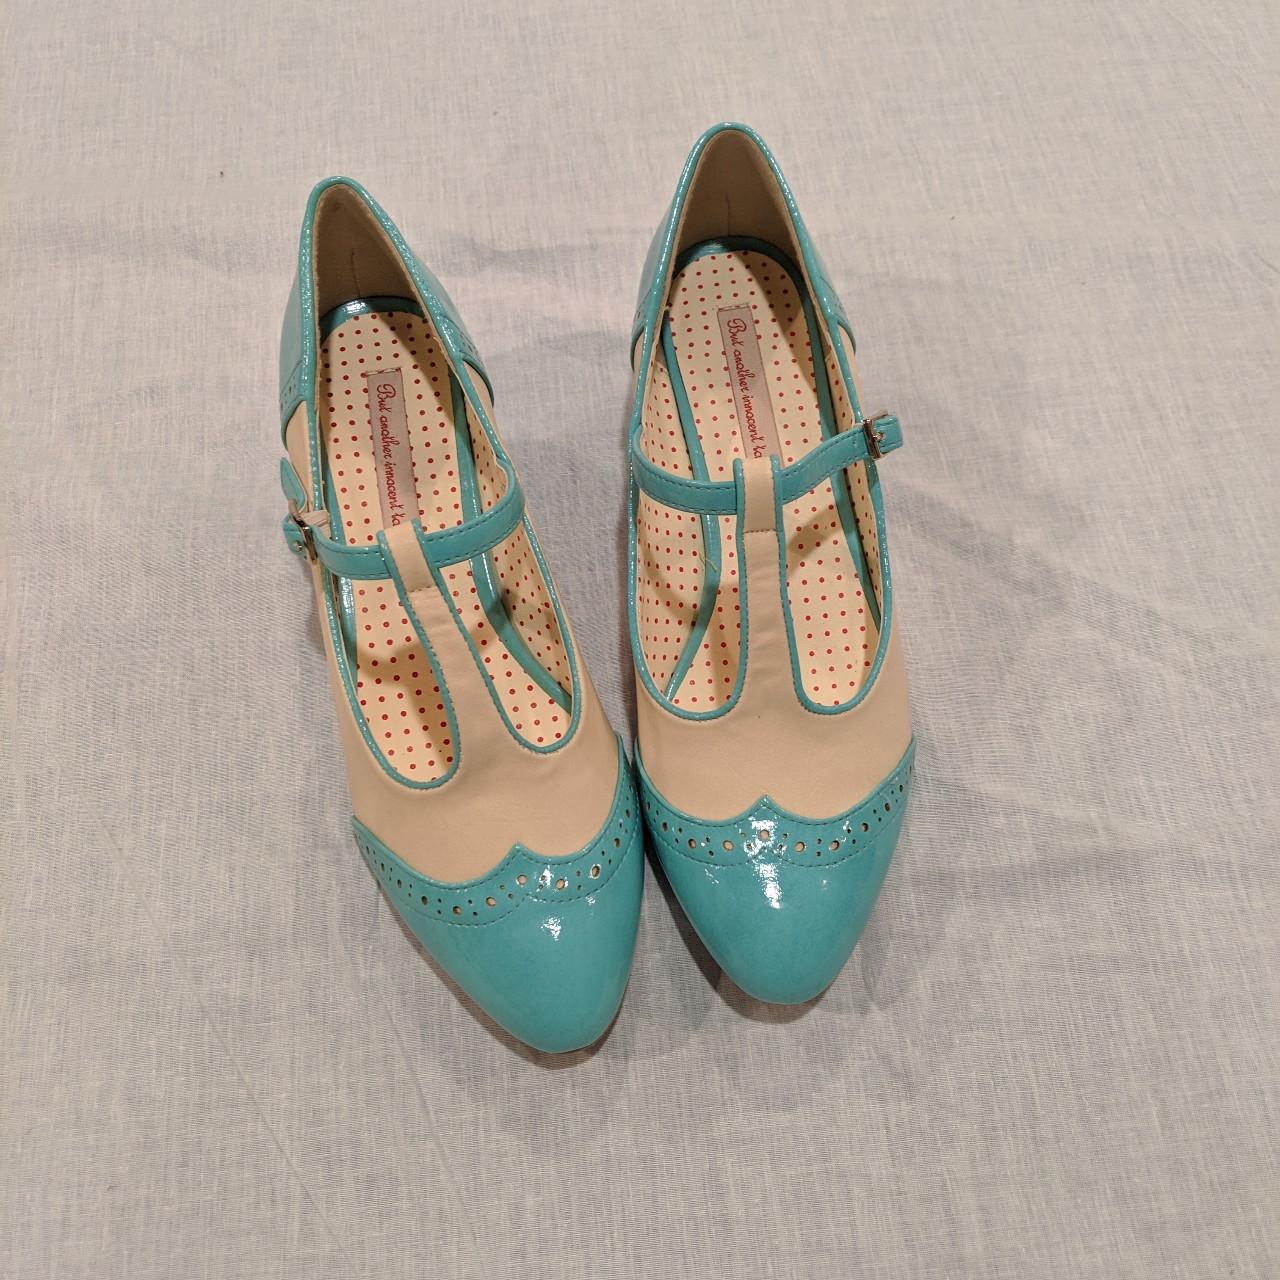 Cute mint blue saddle shoes with wedge heel - Depop